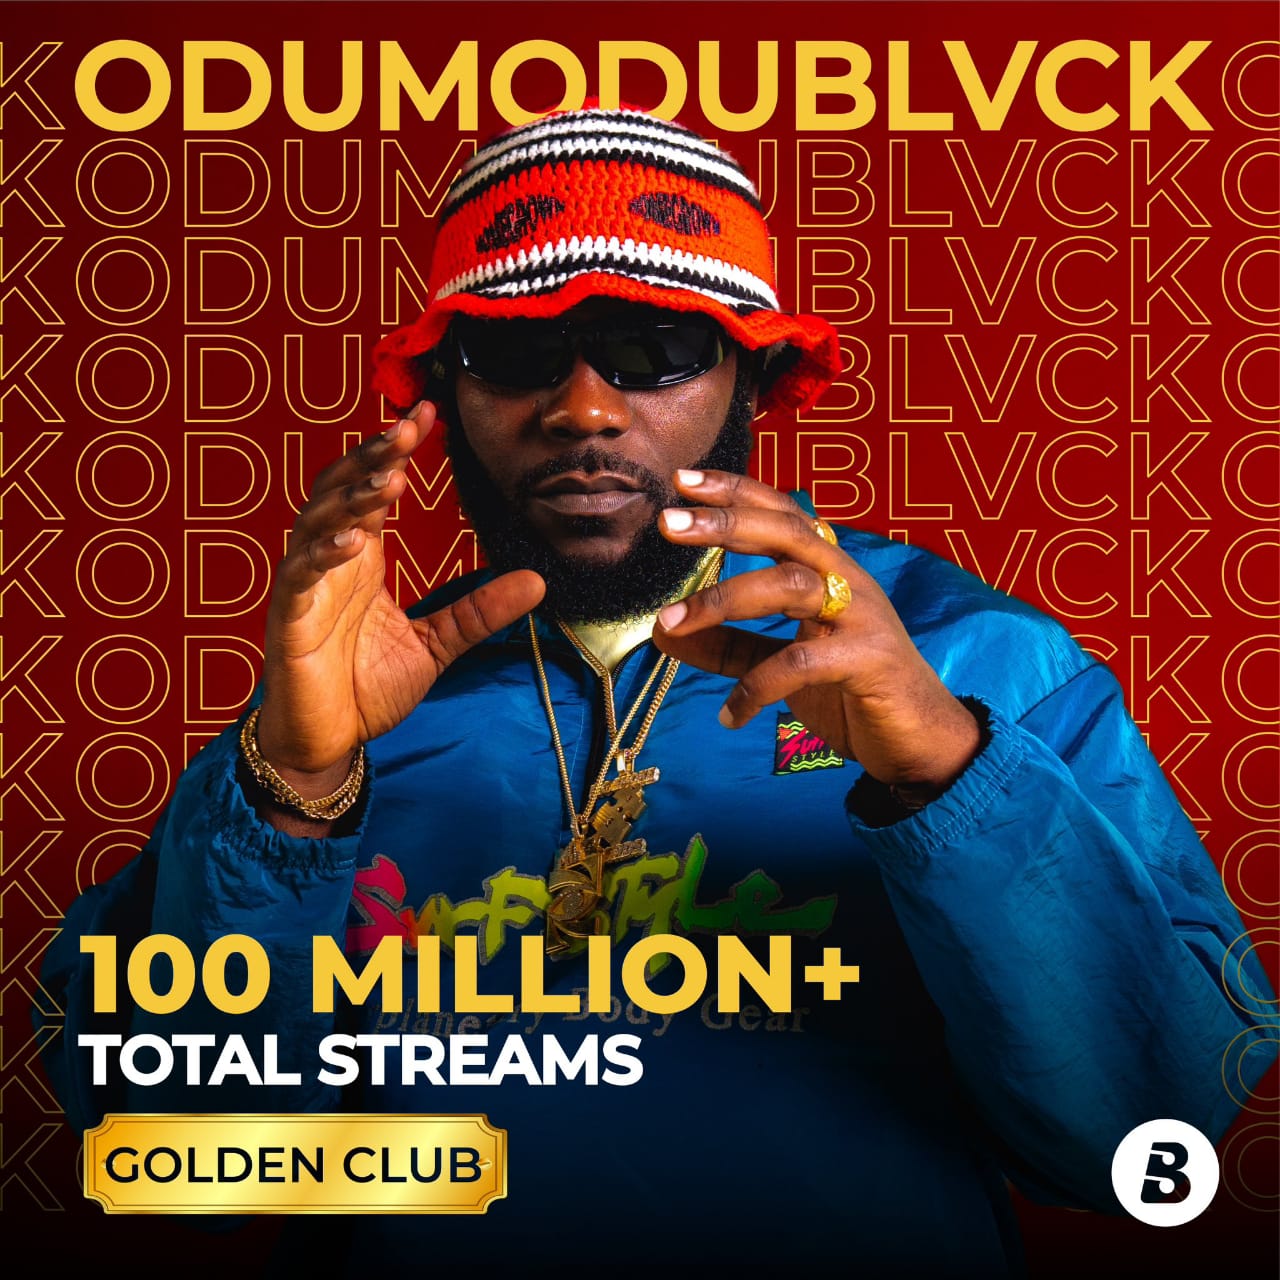 Odumodu Blvck Hits 100 Million Streams On Boomplay Music-Ghflamez-com